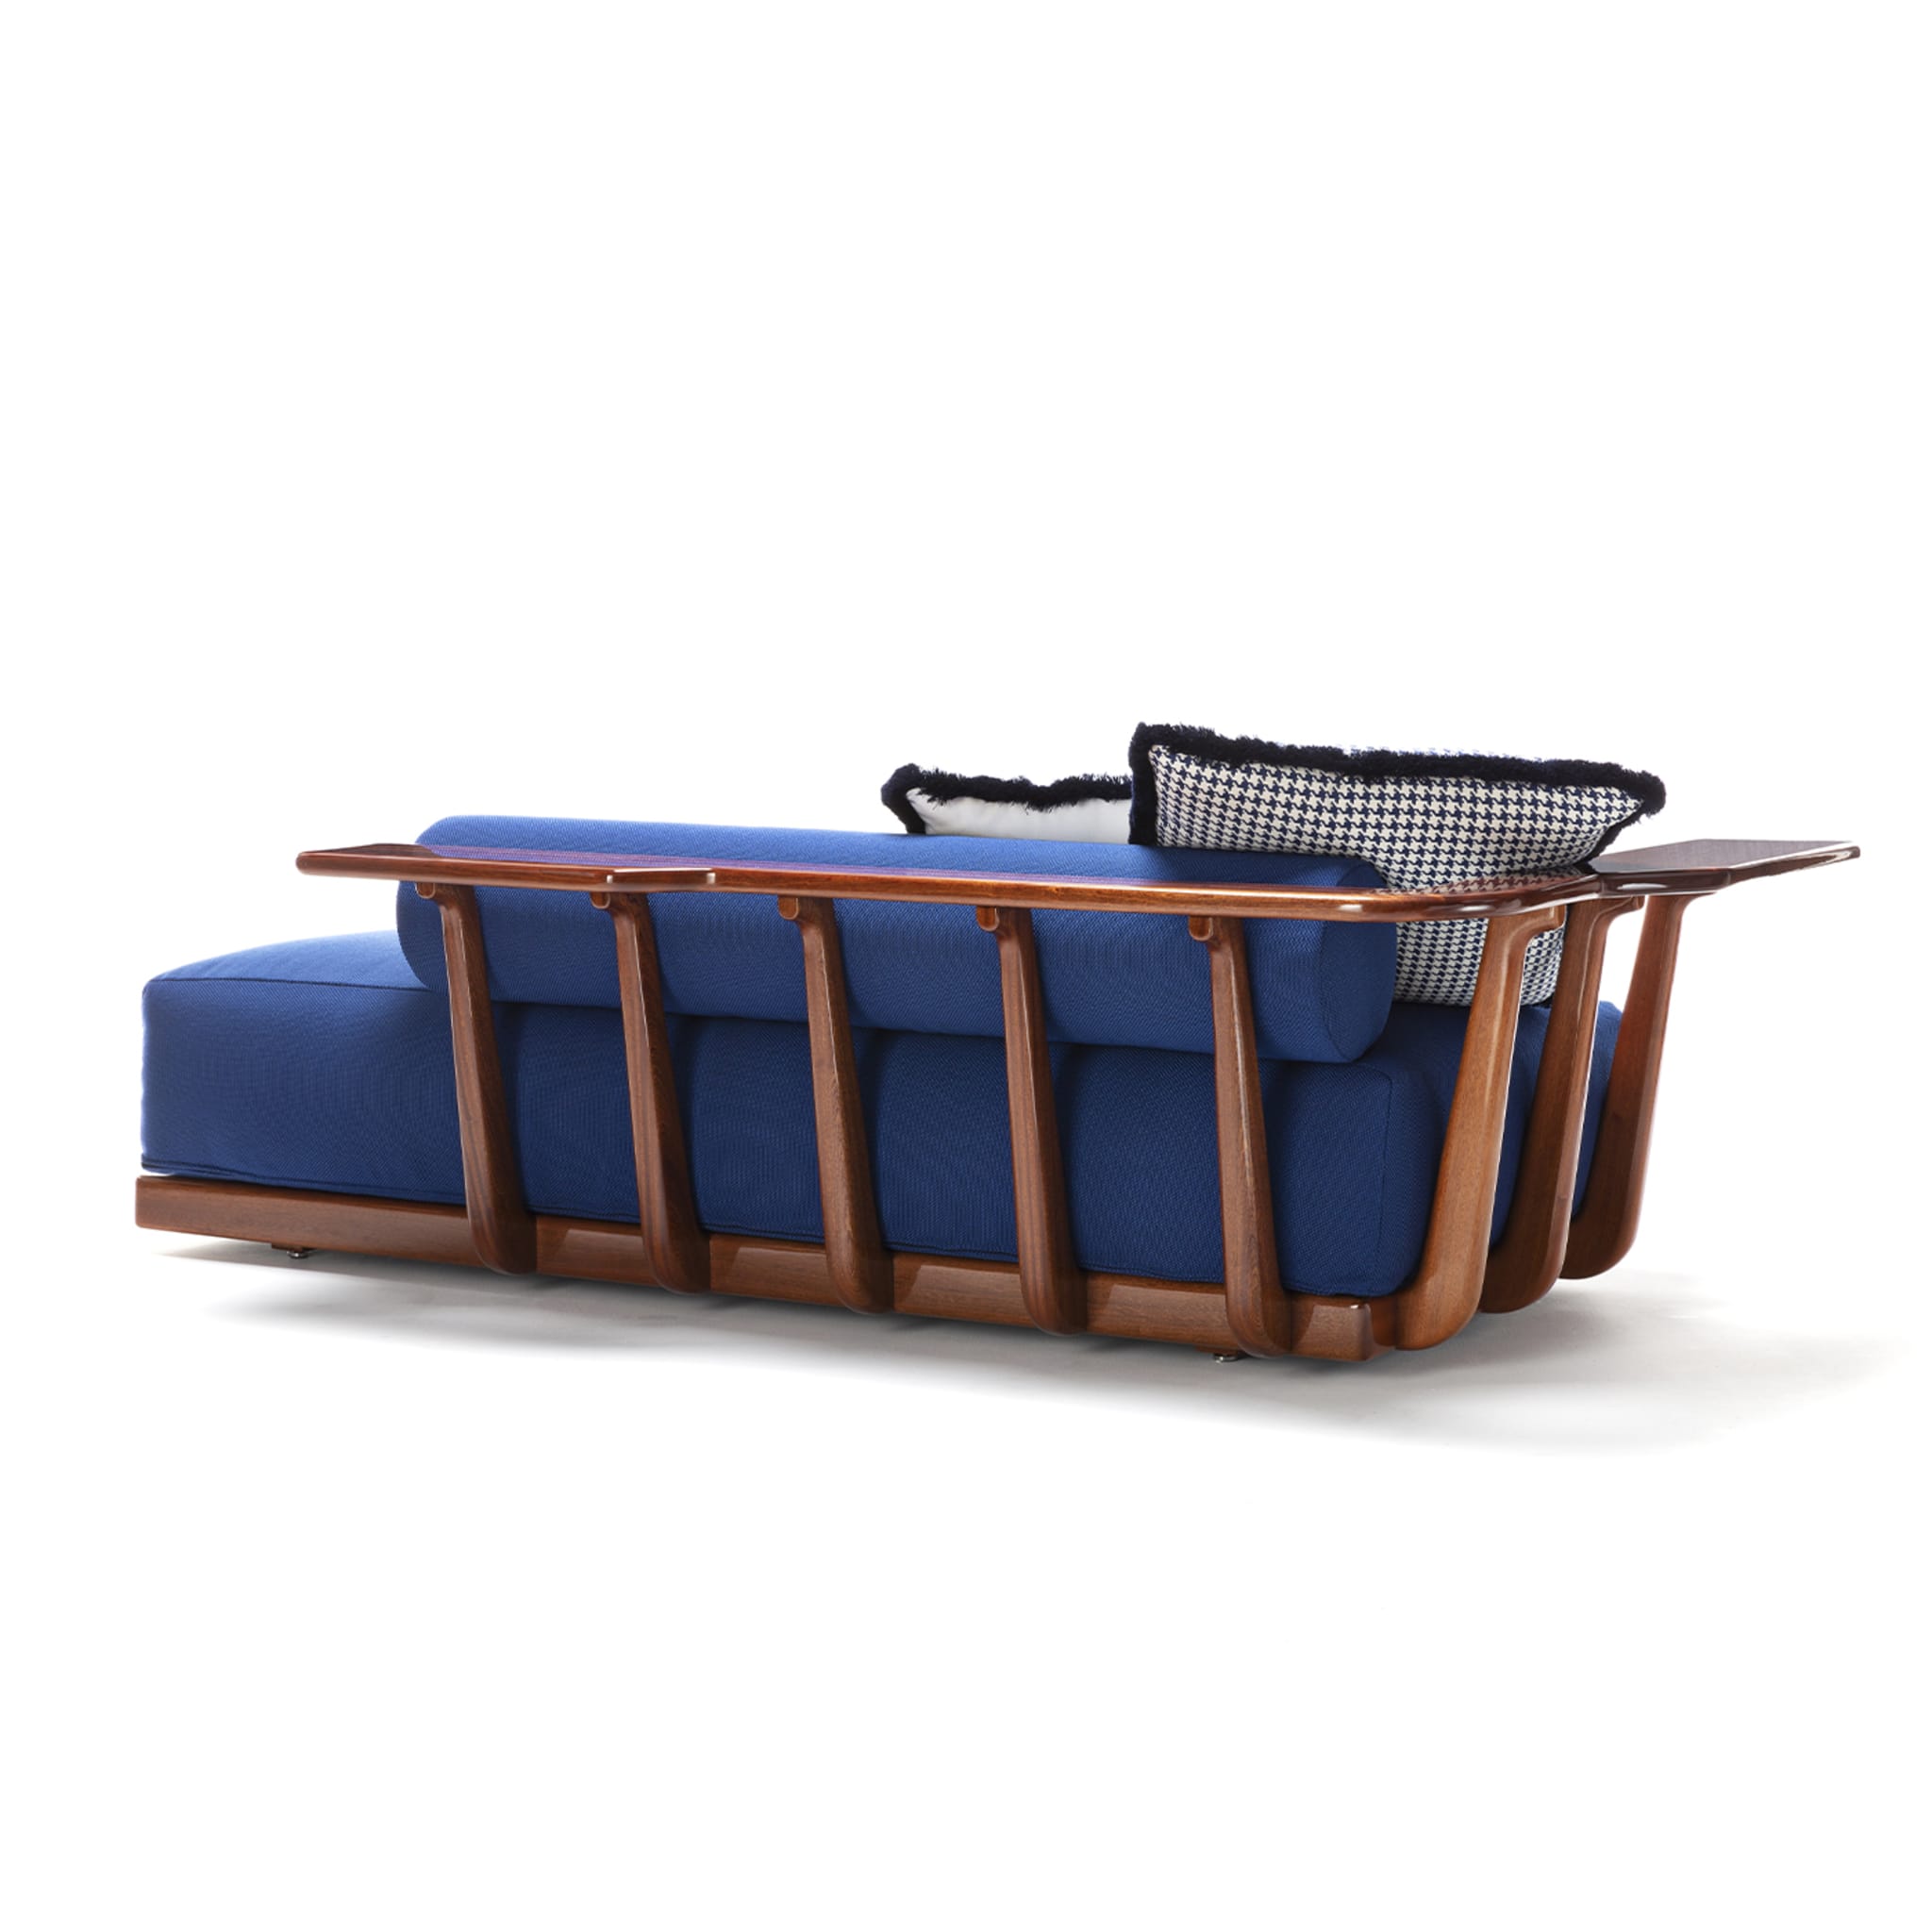 Sunset Platform Sofa with Side Table by Paola Navone - Alternative view 3